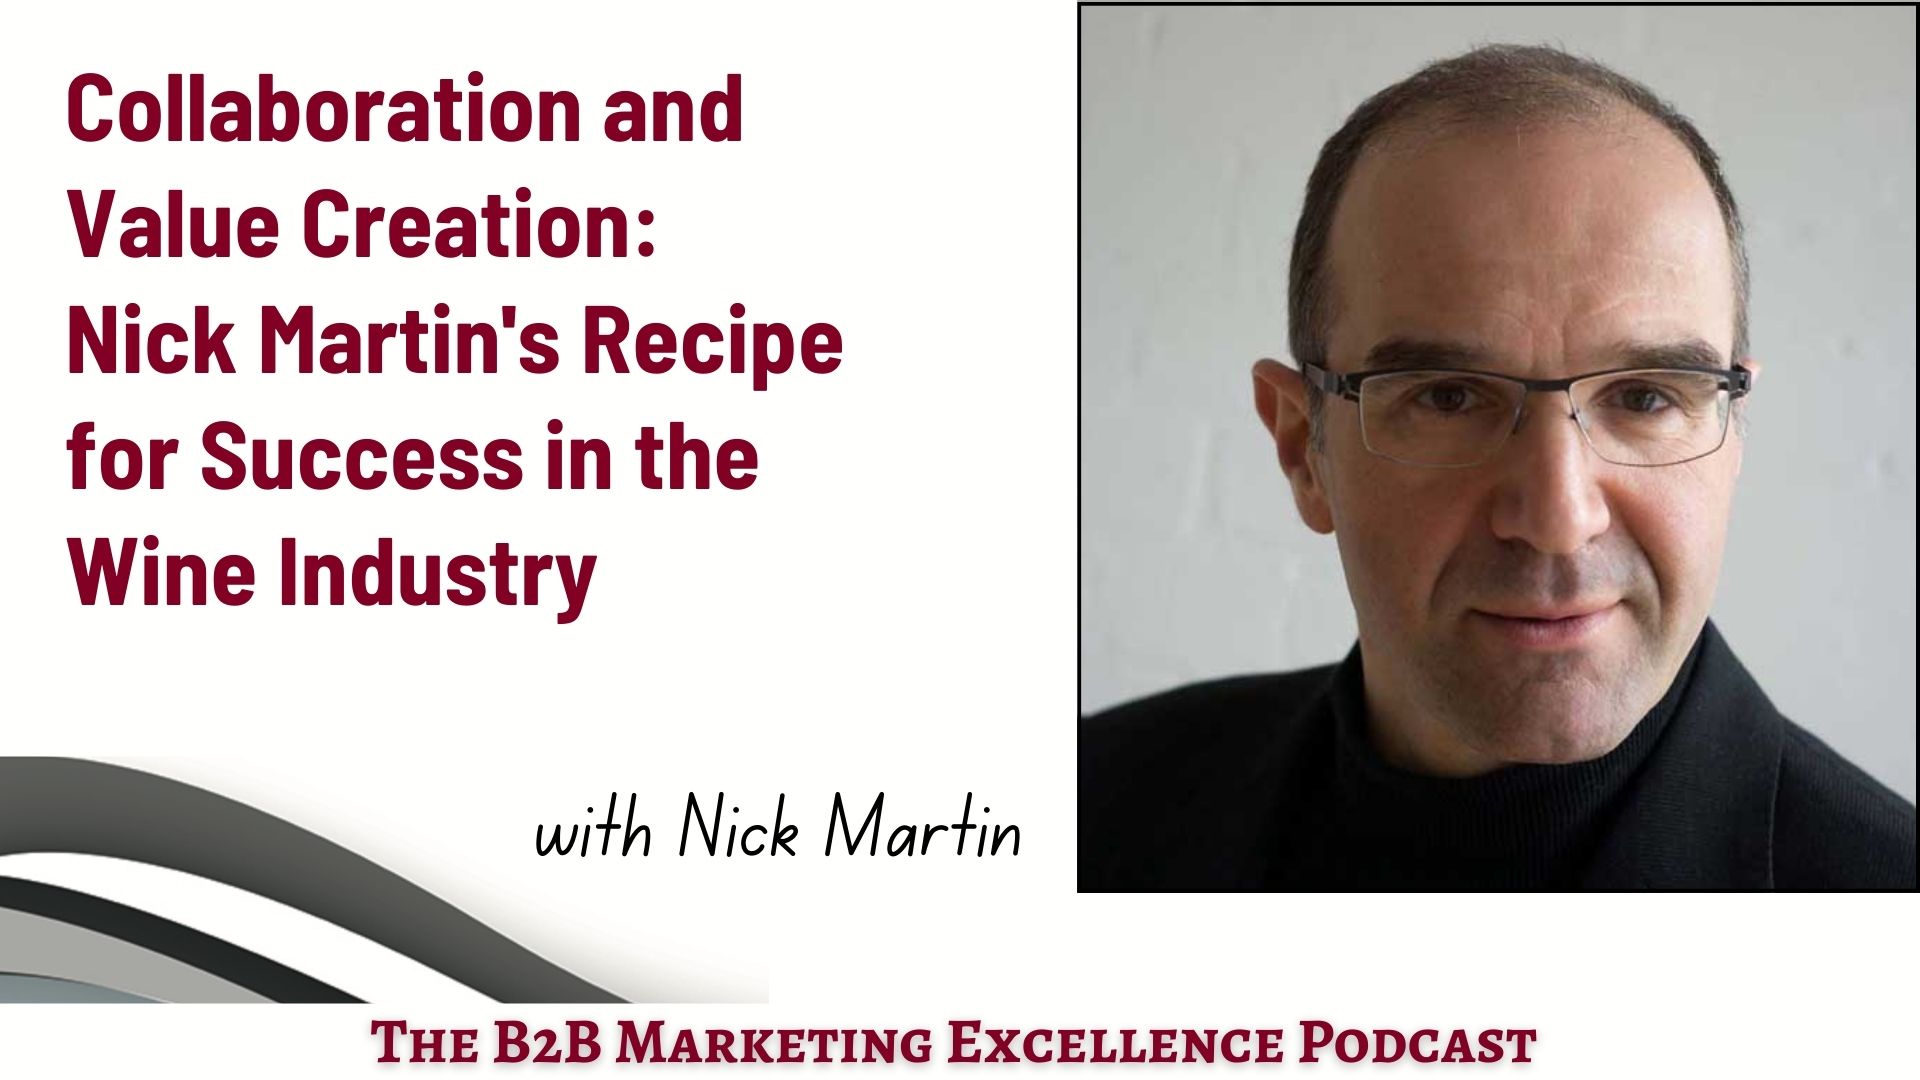 Podcast – Collaboration and Value Creation: Nick Martin’s Recipe for Success in the Wine Industry